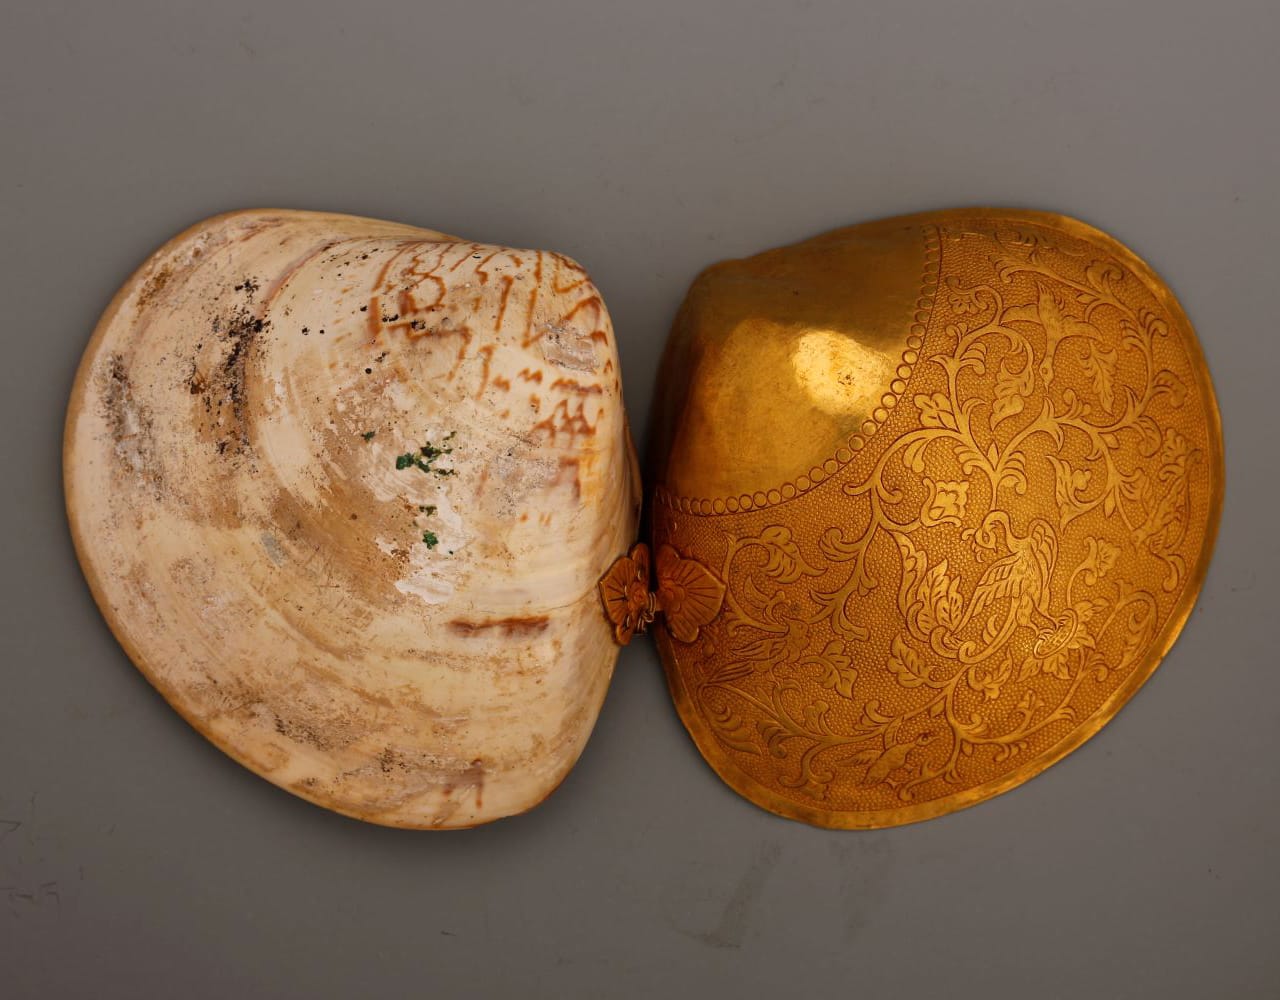 Clam-shaped perfume case, made of half a clam shell joined to a gold replica of the other half. China, Tang dynasty, 618-907 AD